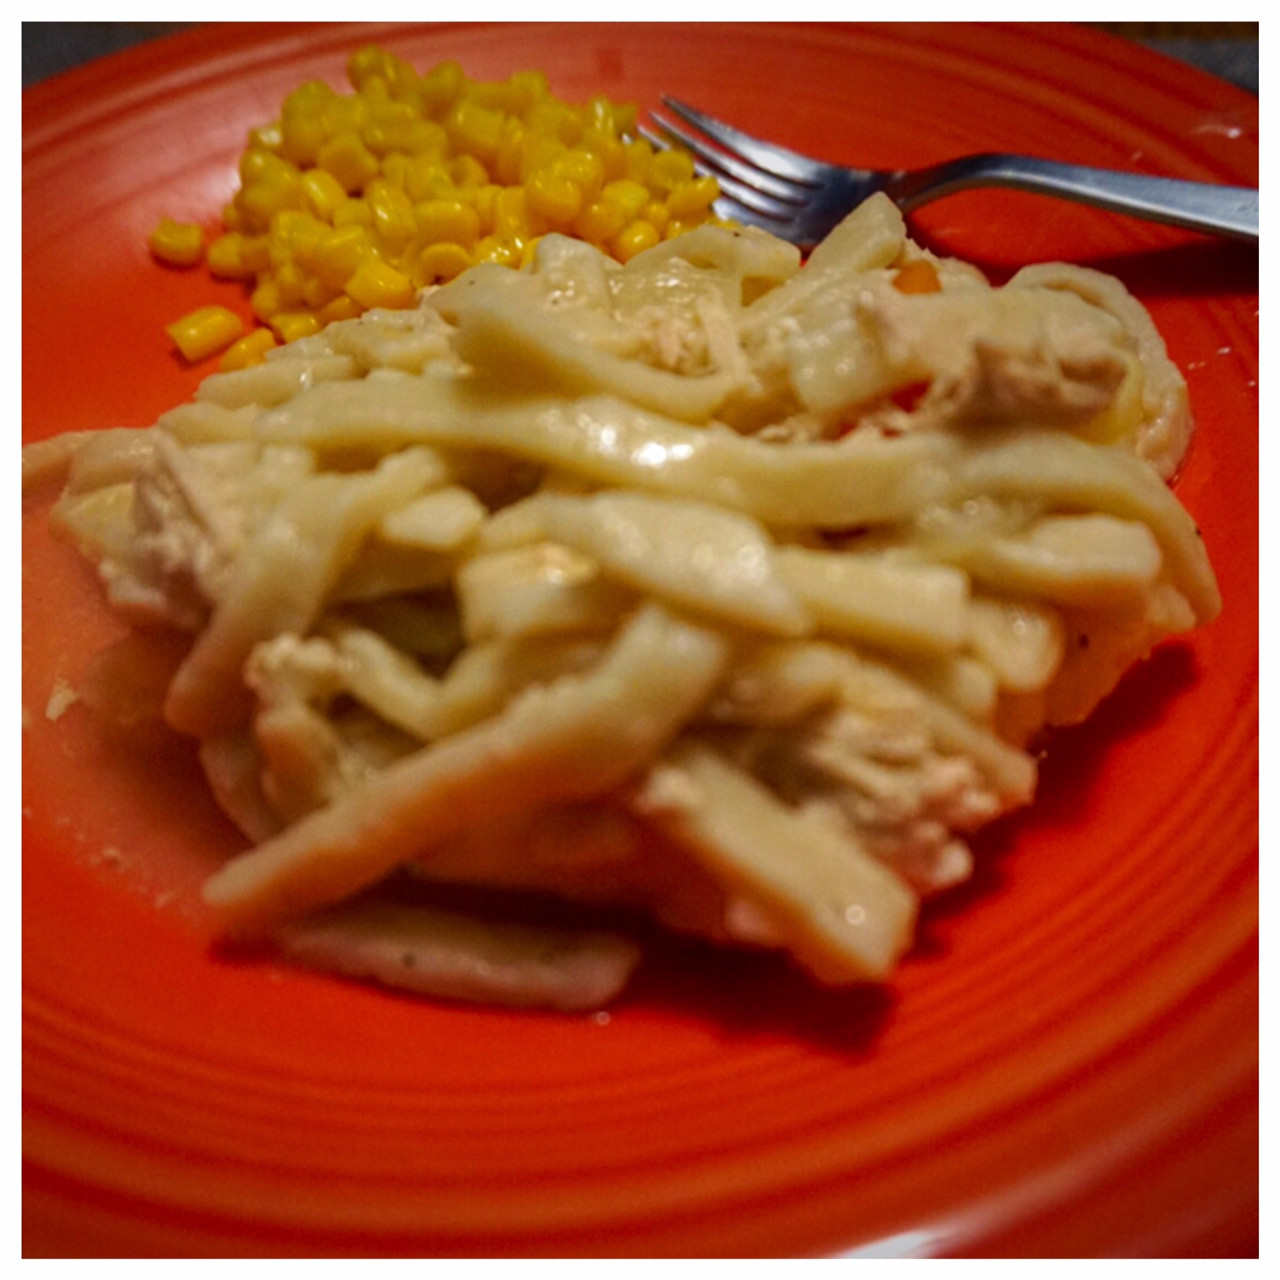 Chicken And Noodles Over Mashed Potatoes
 Chicken and Noodles over Mashed Potatoes – Odds and Ends Girl